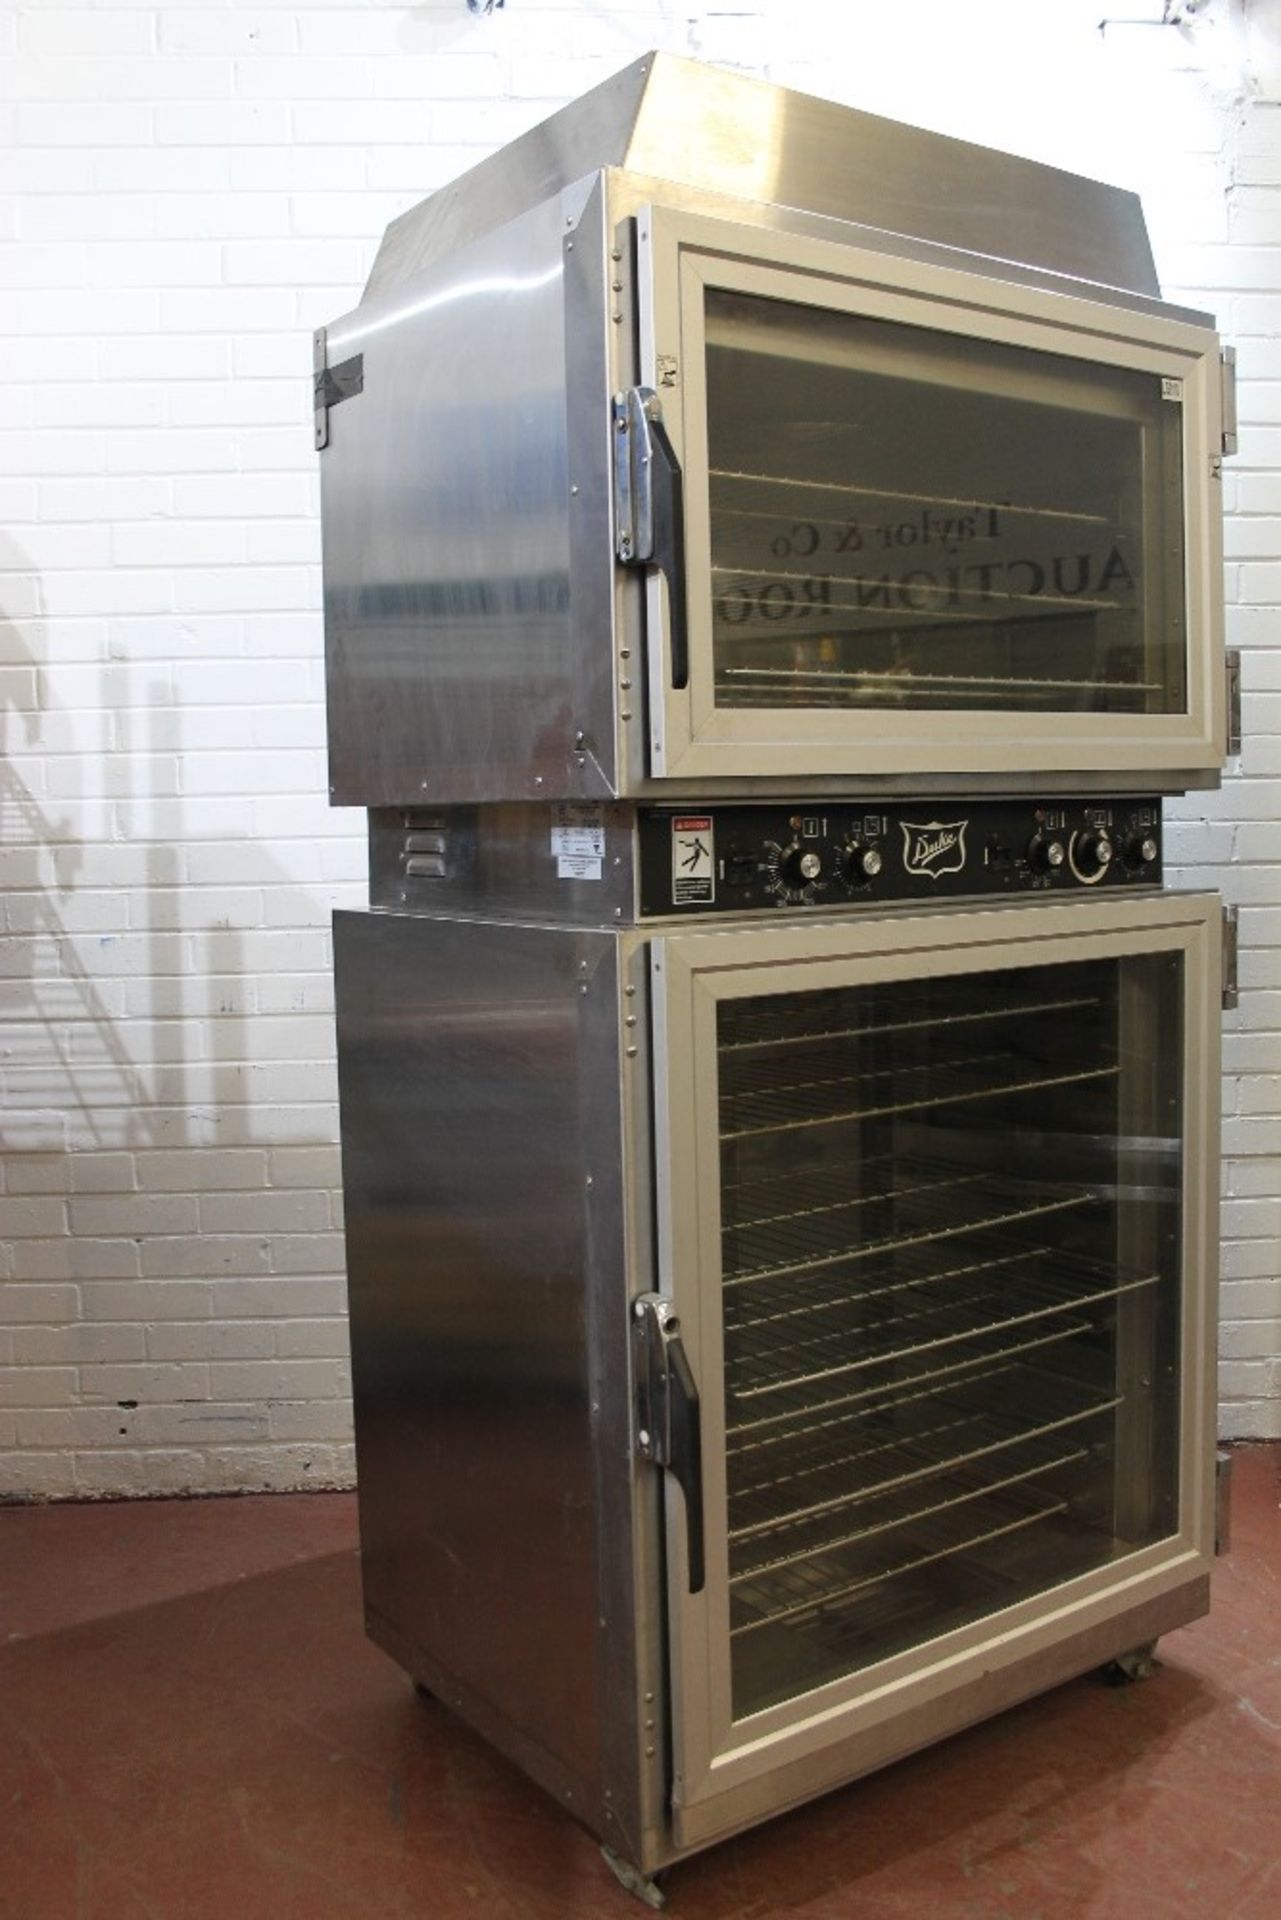 Duke Twin Ovens – 1 x Steam Oven – 1 x Convection Oven - Image 3 of 3